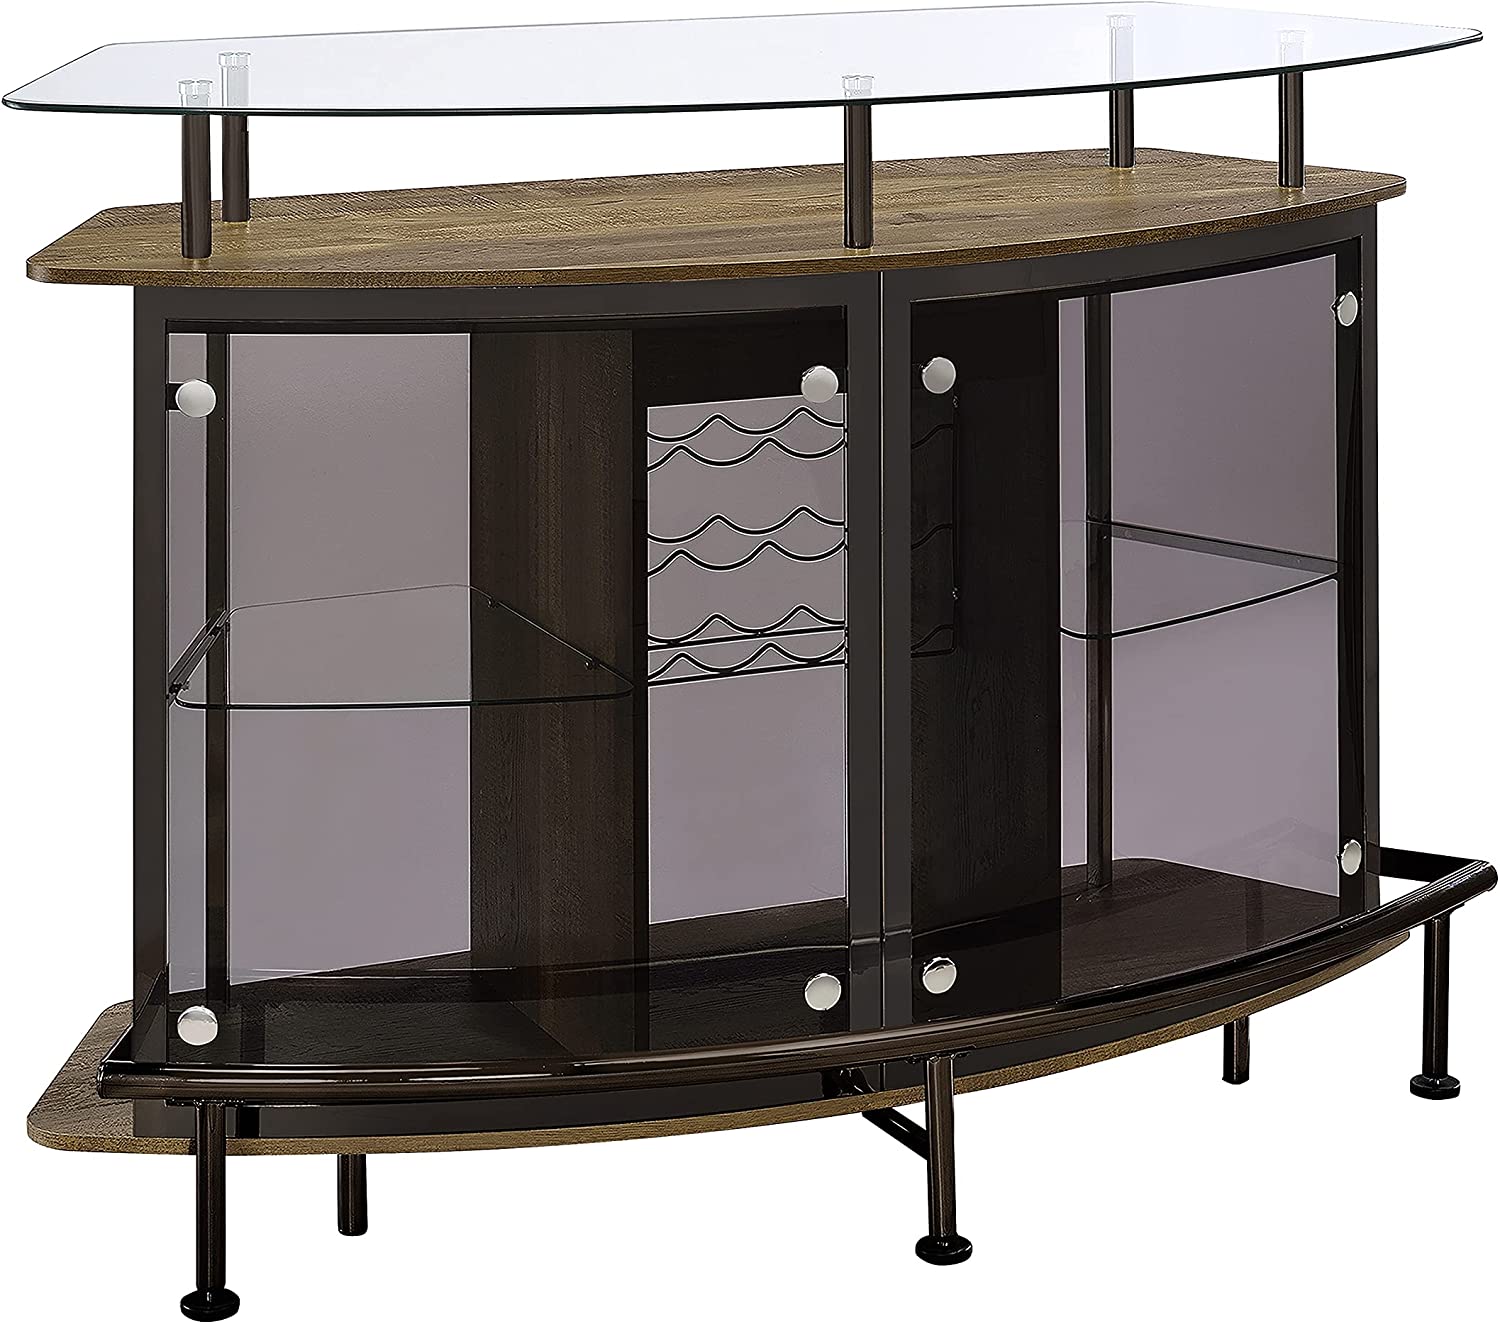 Crescent Shaped Glass Top Bar Unit With Drawer